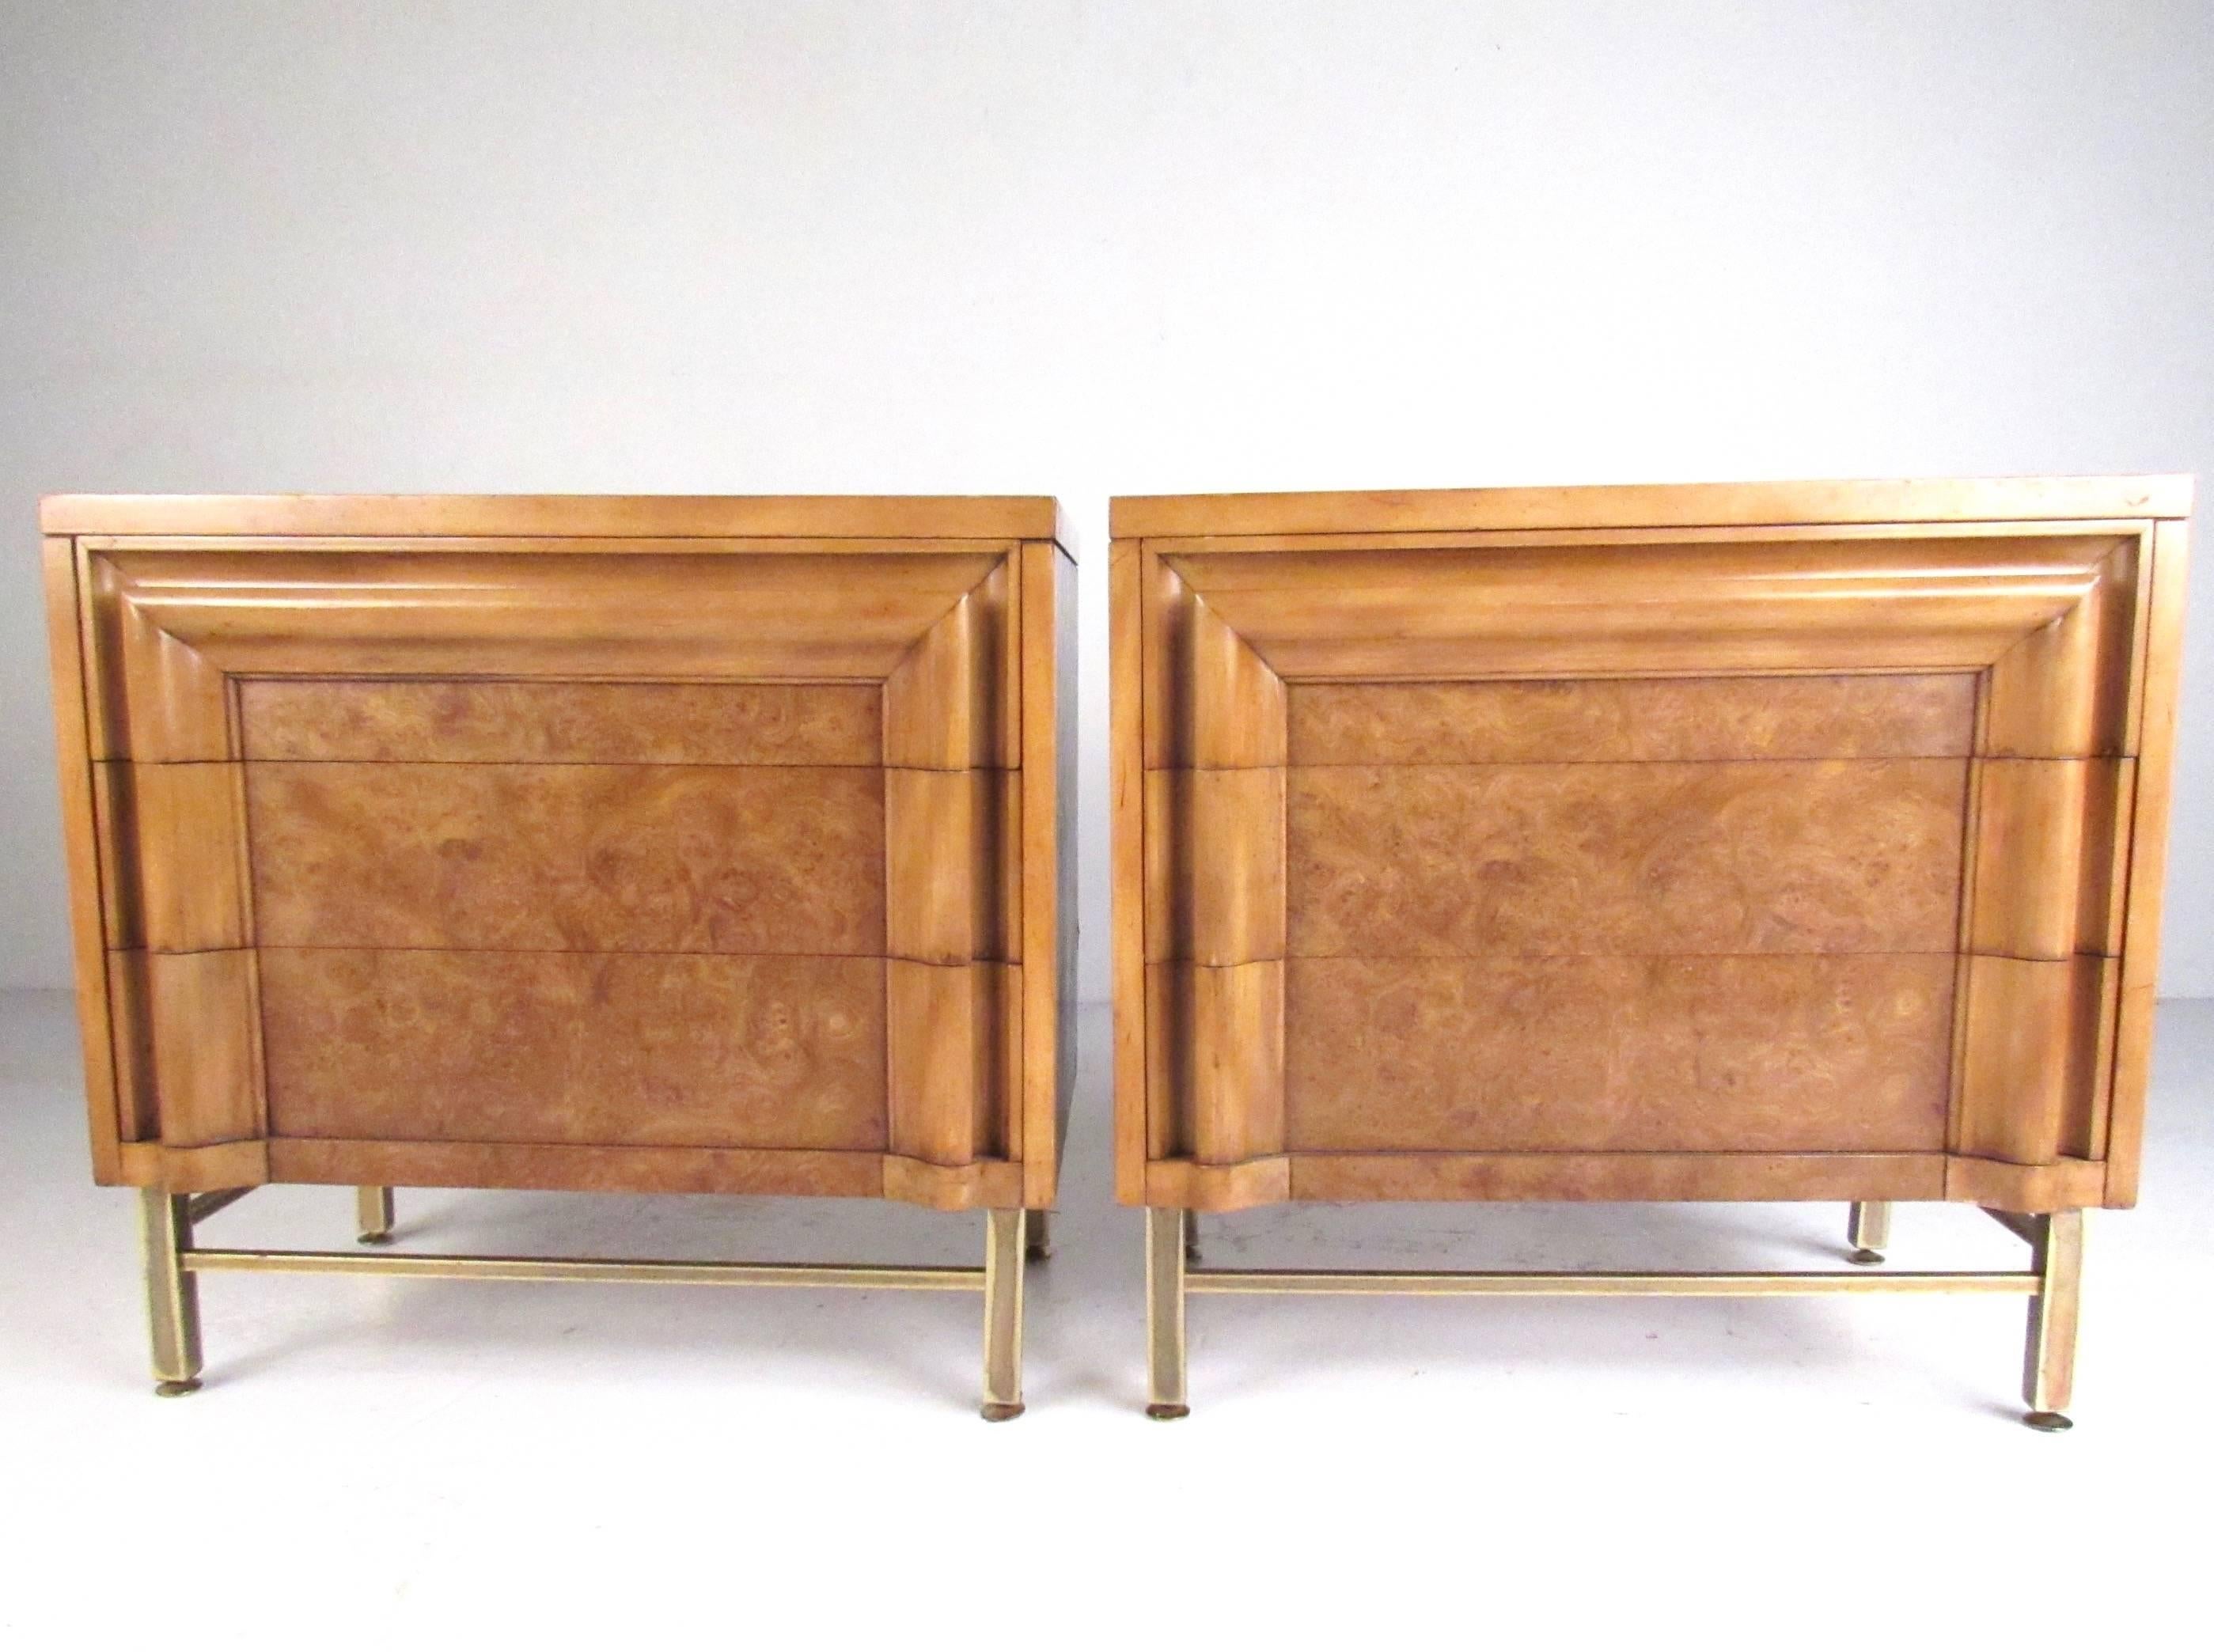 This pair of three-drawer burl wood nightstands feature brass finish legs, two-tone cherry burl wood finish, and offers plenty of storage for bedside use. Quality Mid-Century American construction makes these an impressive addition to any interior.